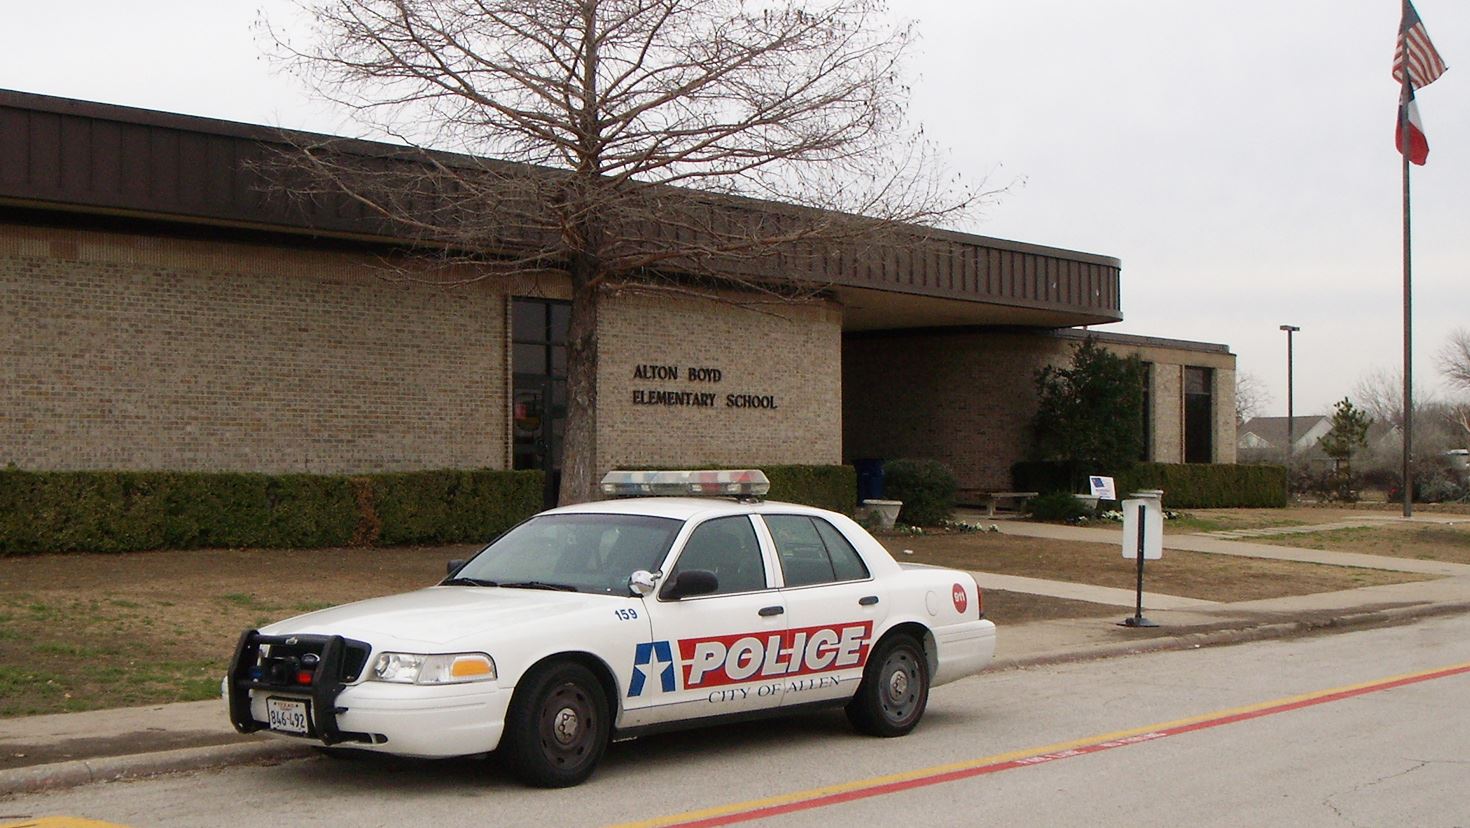 Image of City of Allen Police Department and Jail